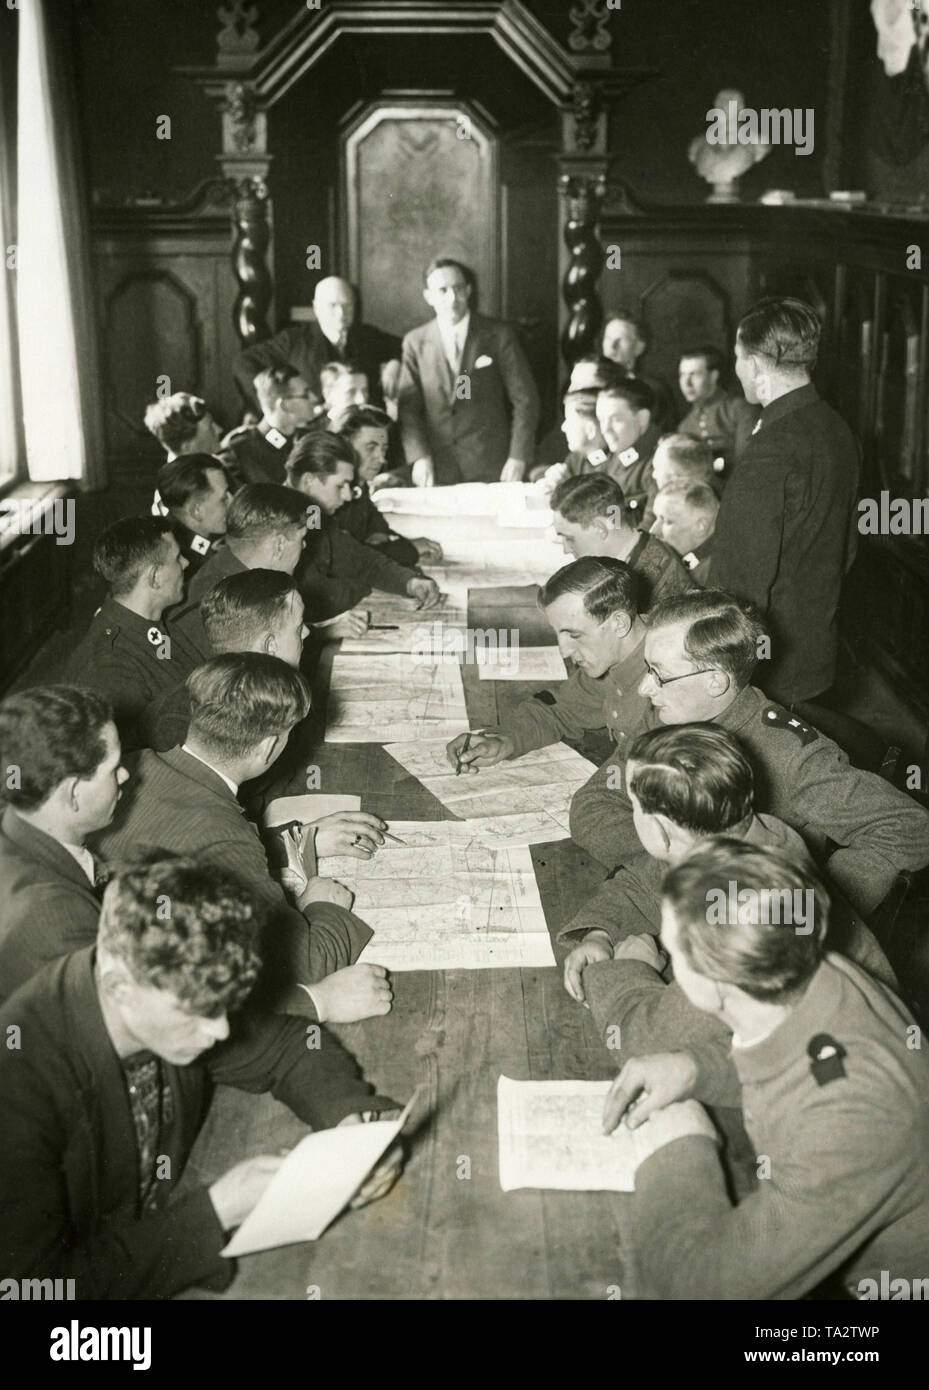 The Berlin Red Cross takes over the training of young unemployed people in its 'Notwerk deutscher Jugend' (Emergency Organization for German Youth). Young men, some in field uniform or the uniform of the Red Cross study maps of Doeberitz at a long table. Paramilitary sports was part of the training of the organization and Doeberitz, as a former military school offered enough space to accommodate the young people, so the photo was probably made there and shows the group shortly before a field exercise. Stock Photo